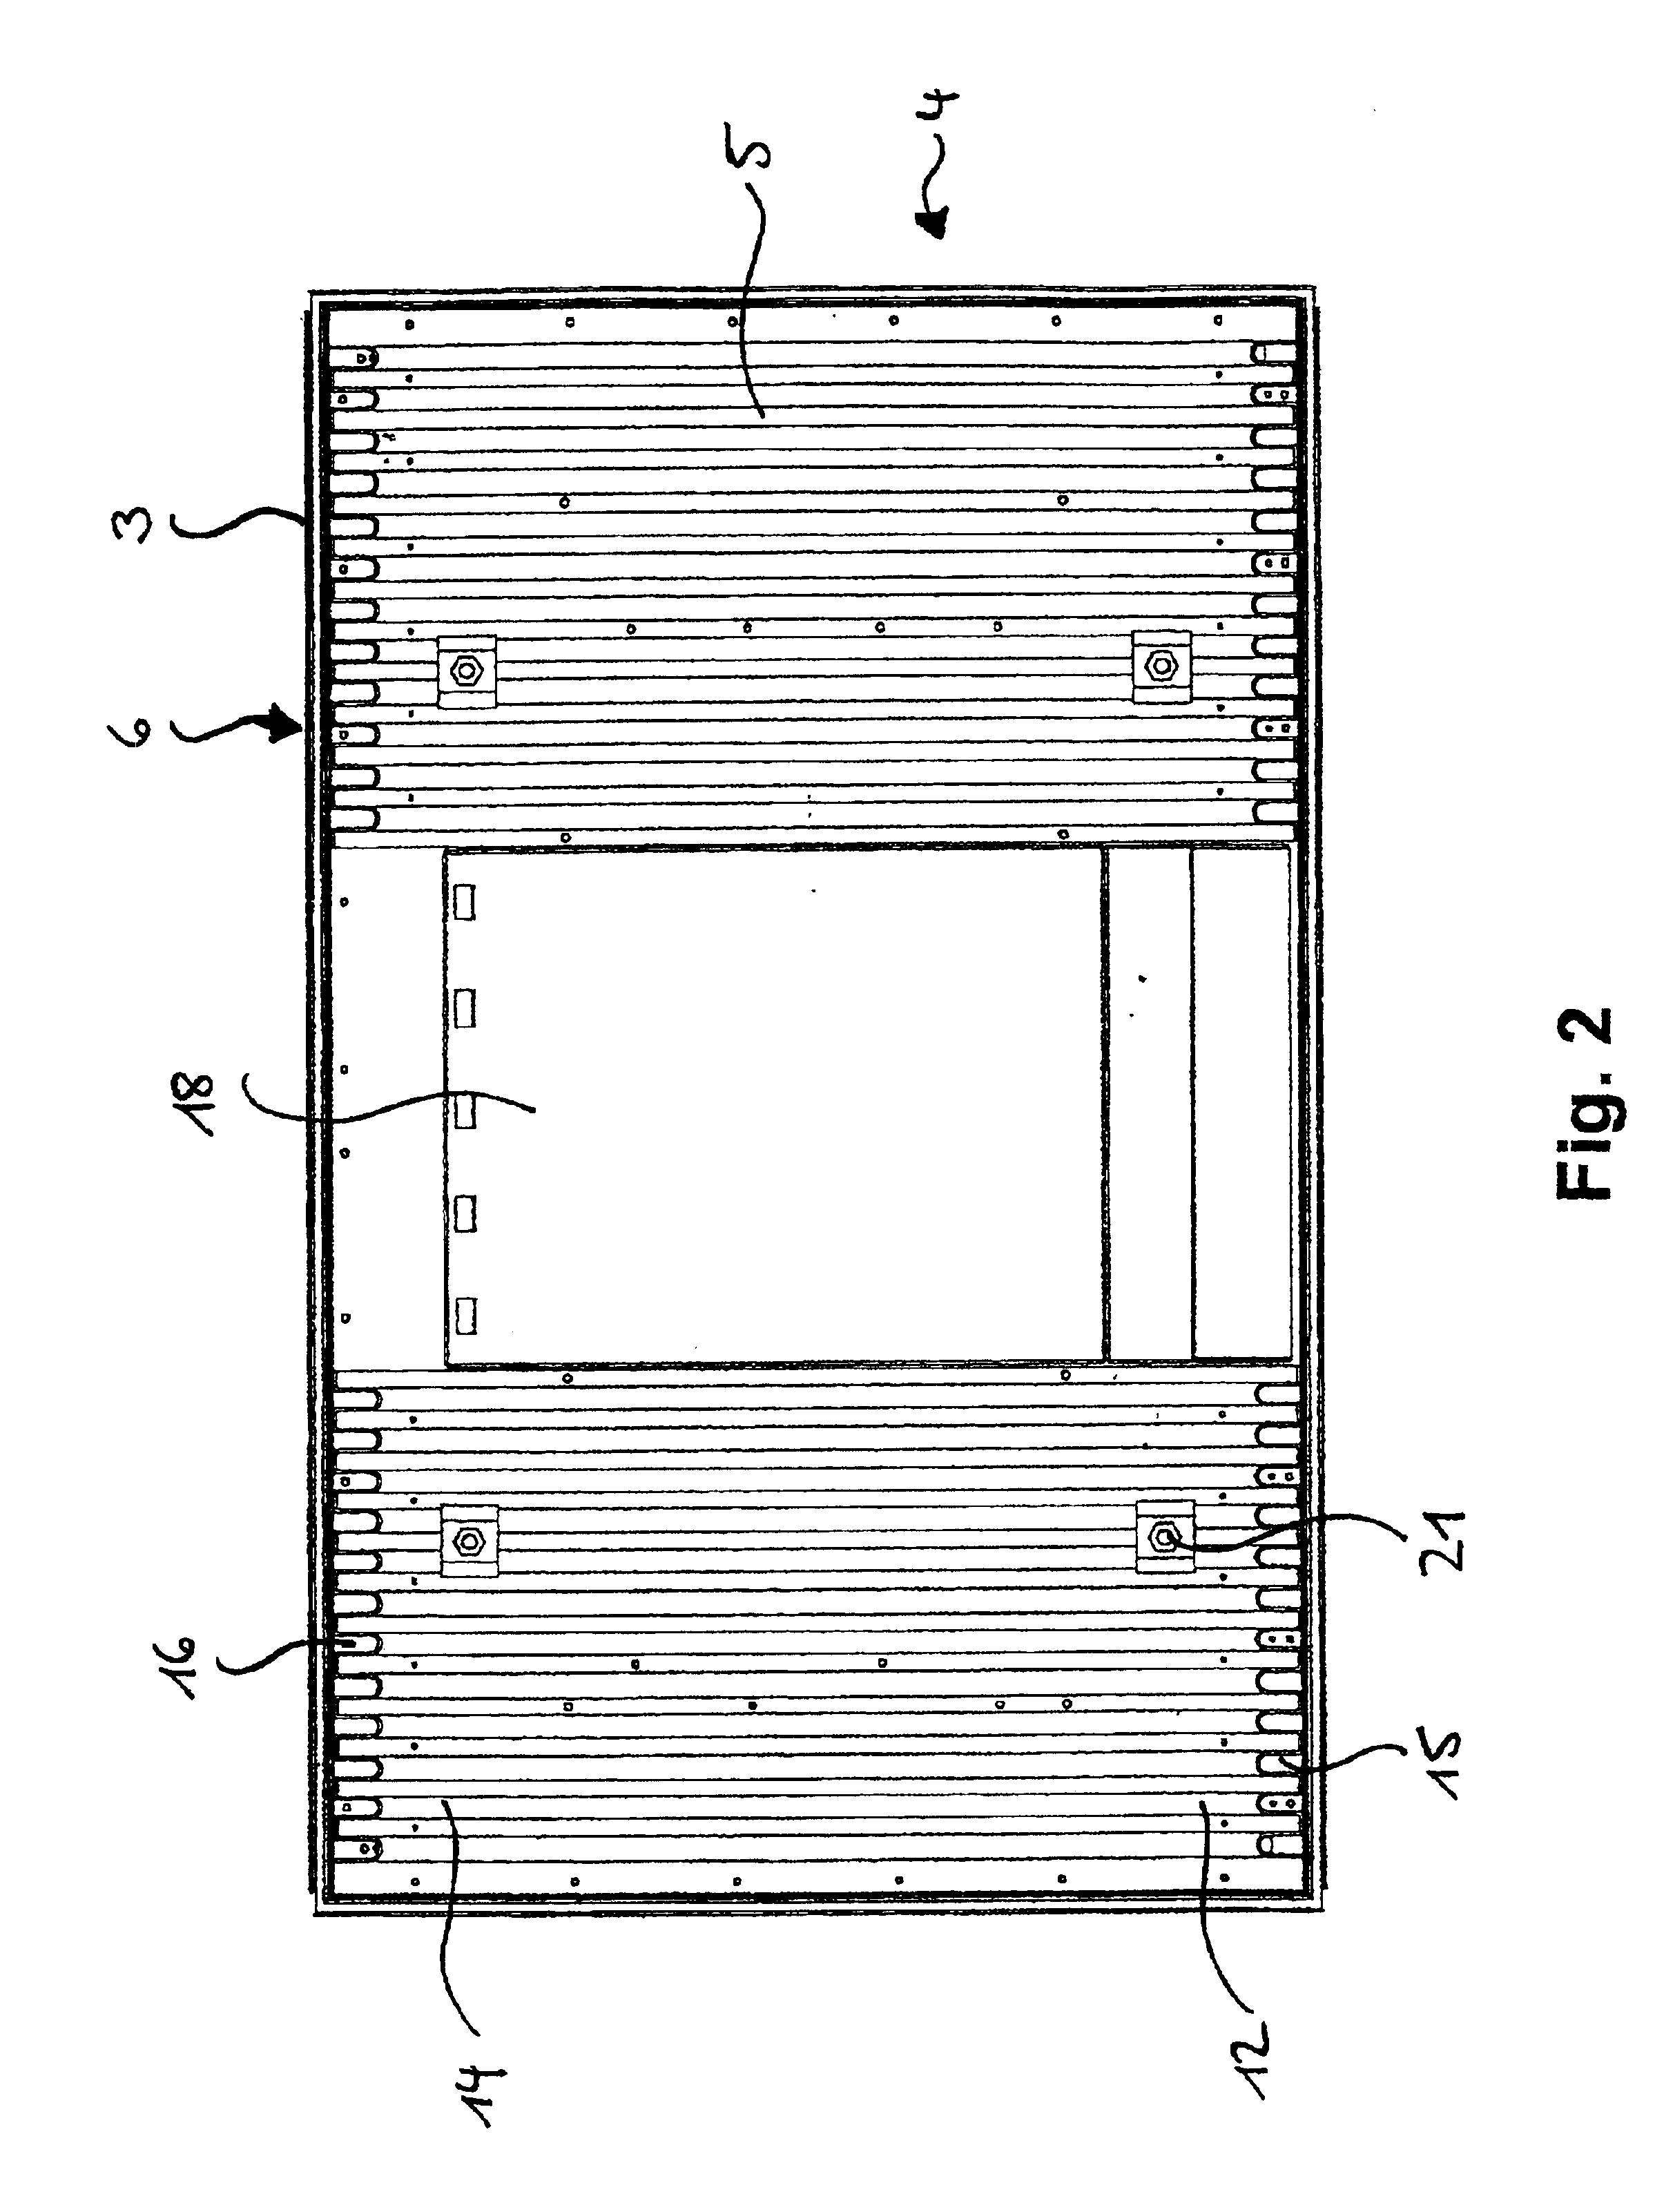 Apparatus for mounting and cooling a flat screen